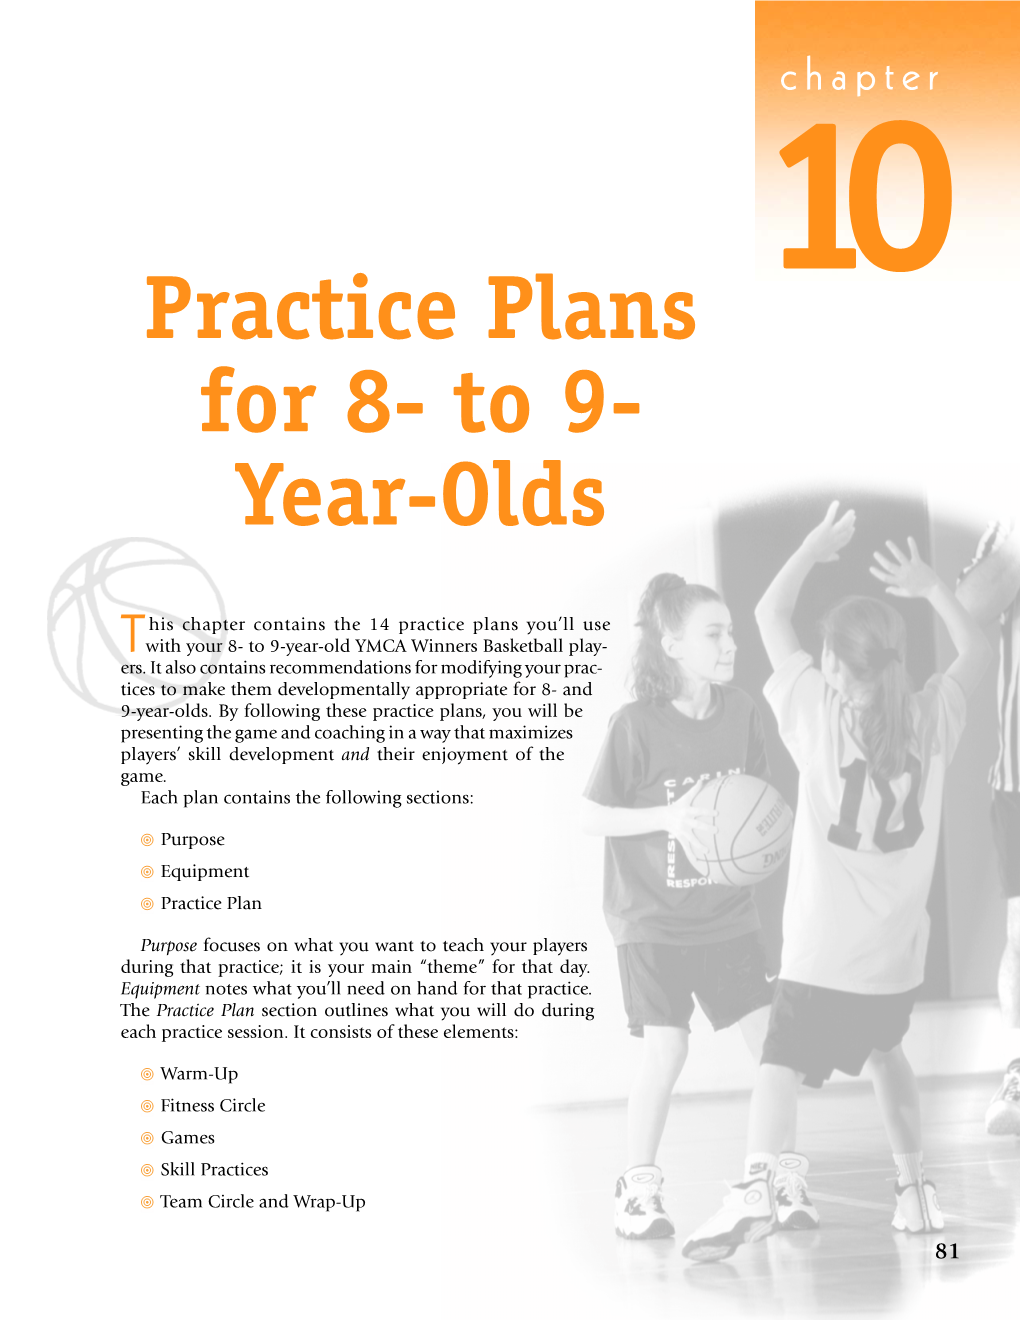 Practice Plans for 8- to 9- Year-Olds